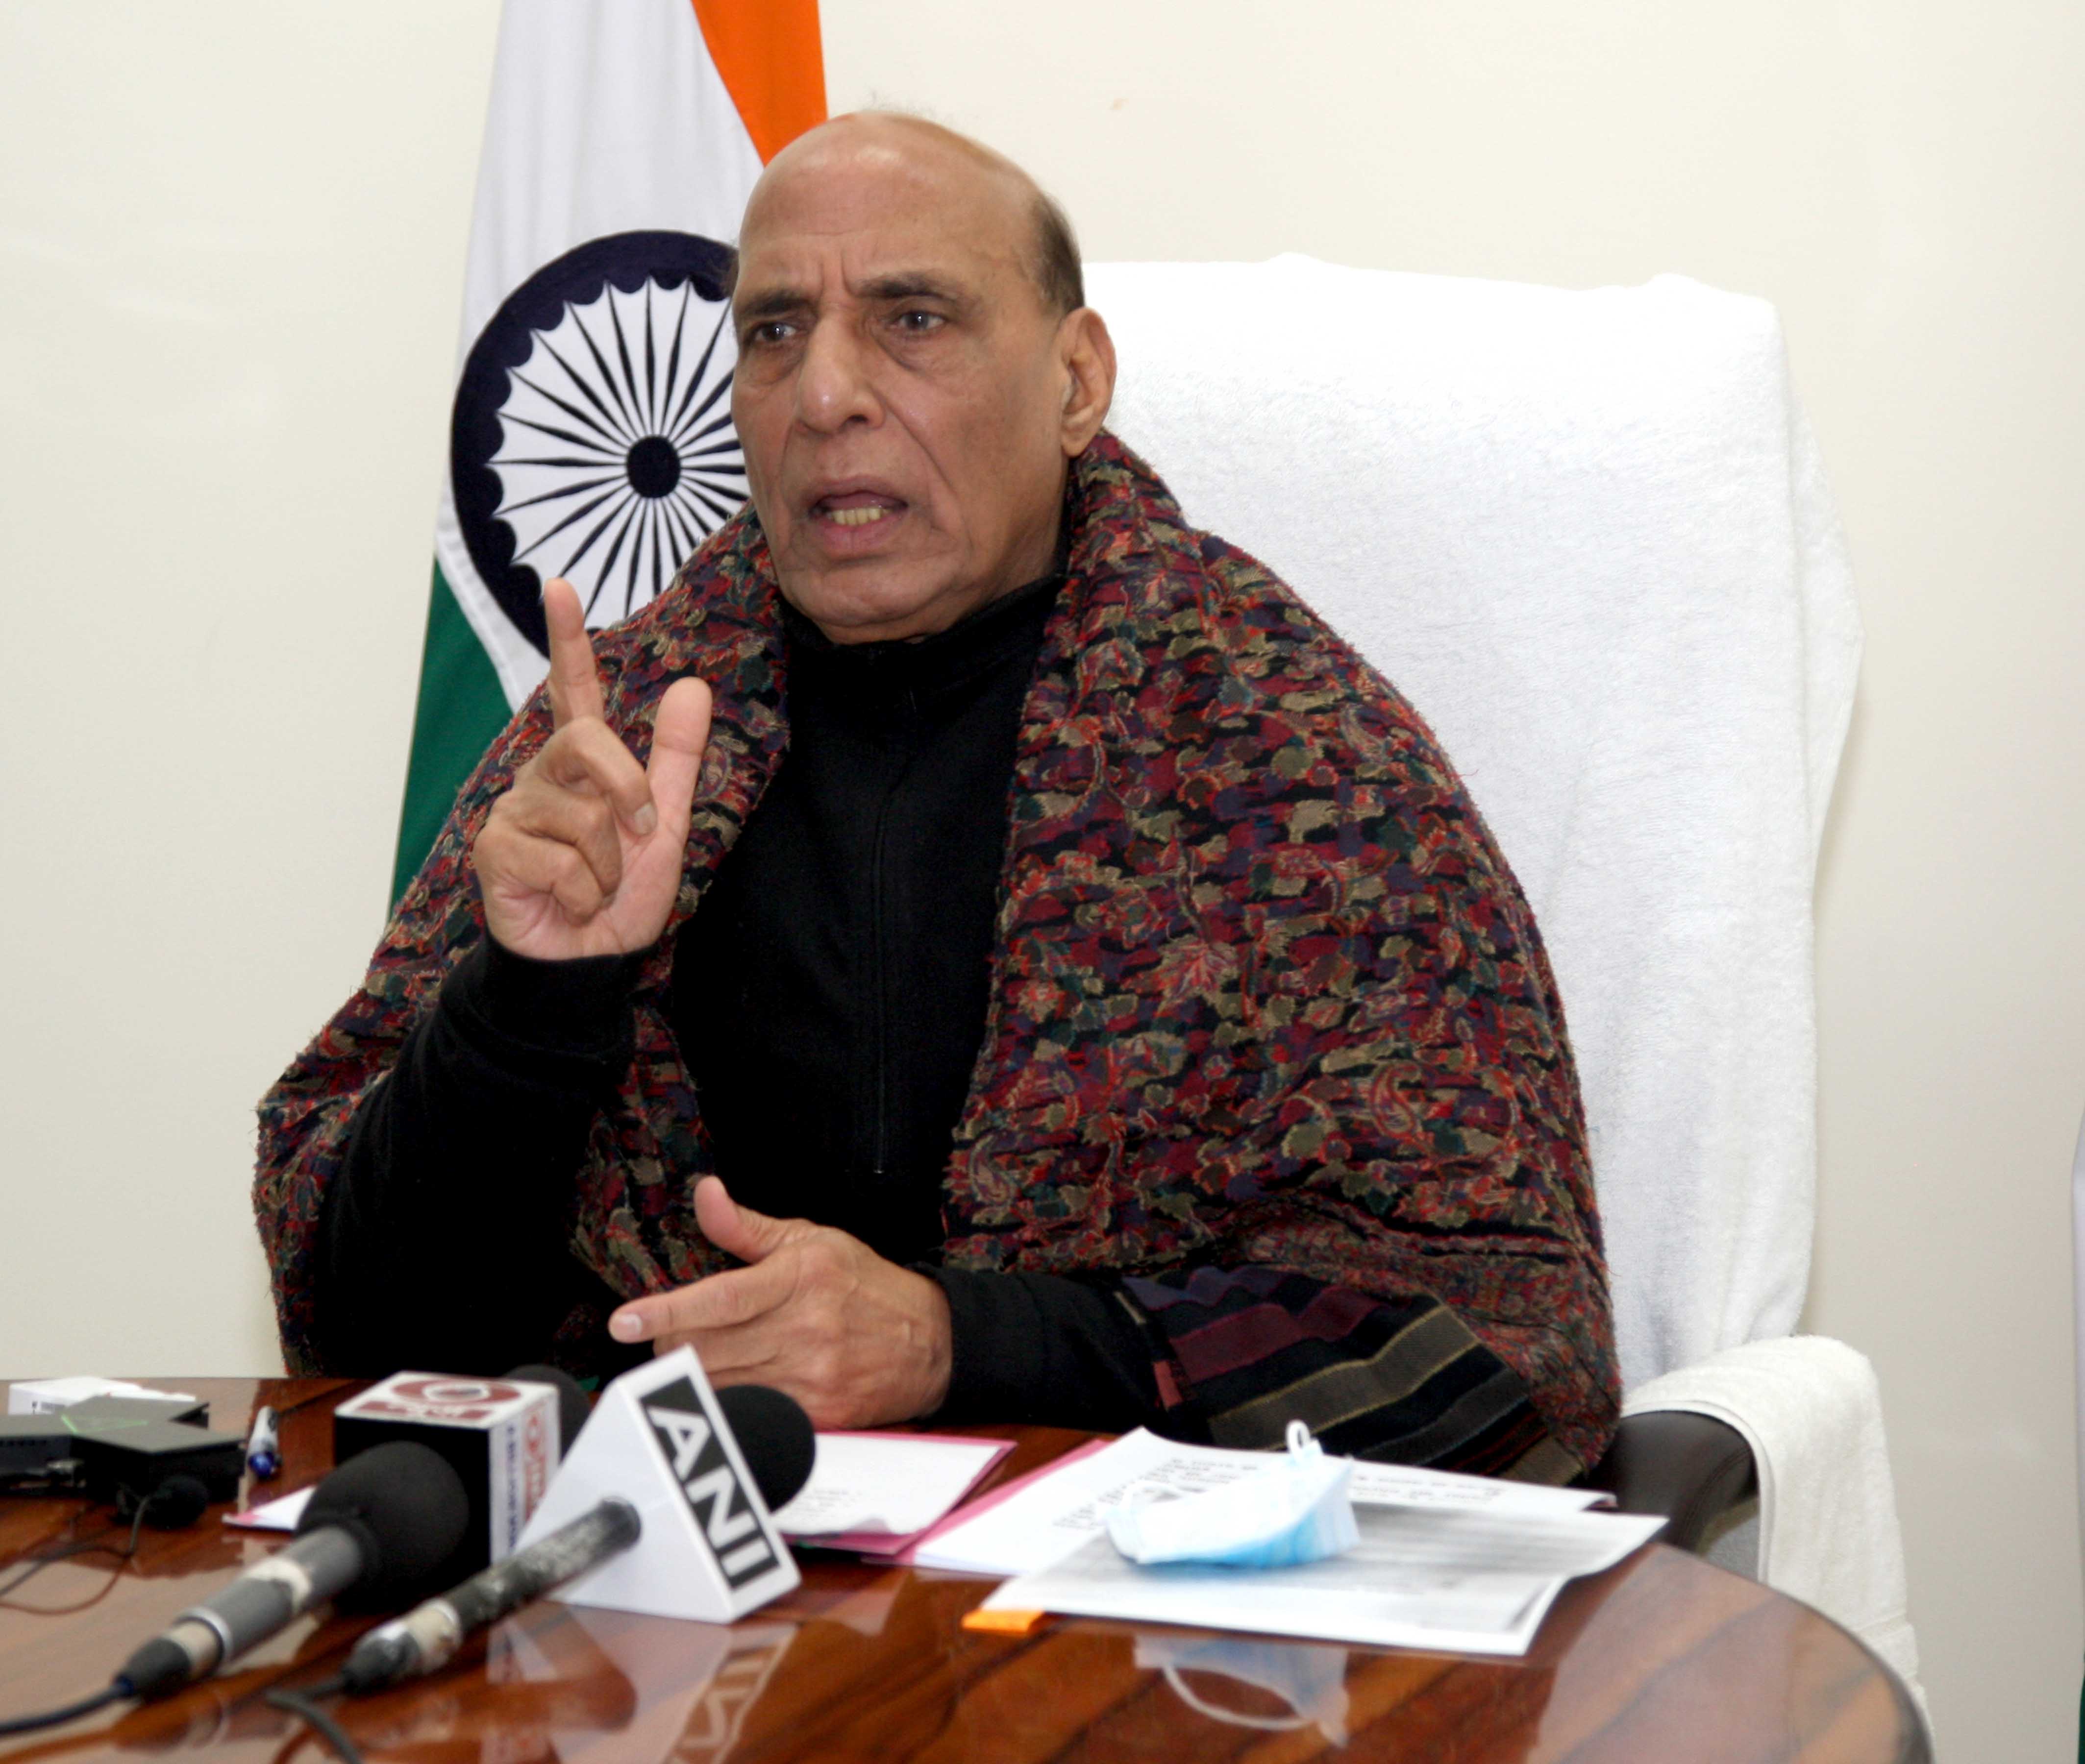 Raksha Mantri Shri Rajnath Singh virtually interacting with the cadets of National Cadet Corps (NCC), taking part in the Republic Day Camp 2022, on January 22, 2022.